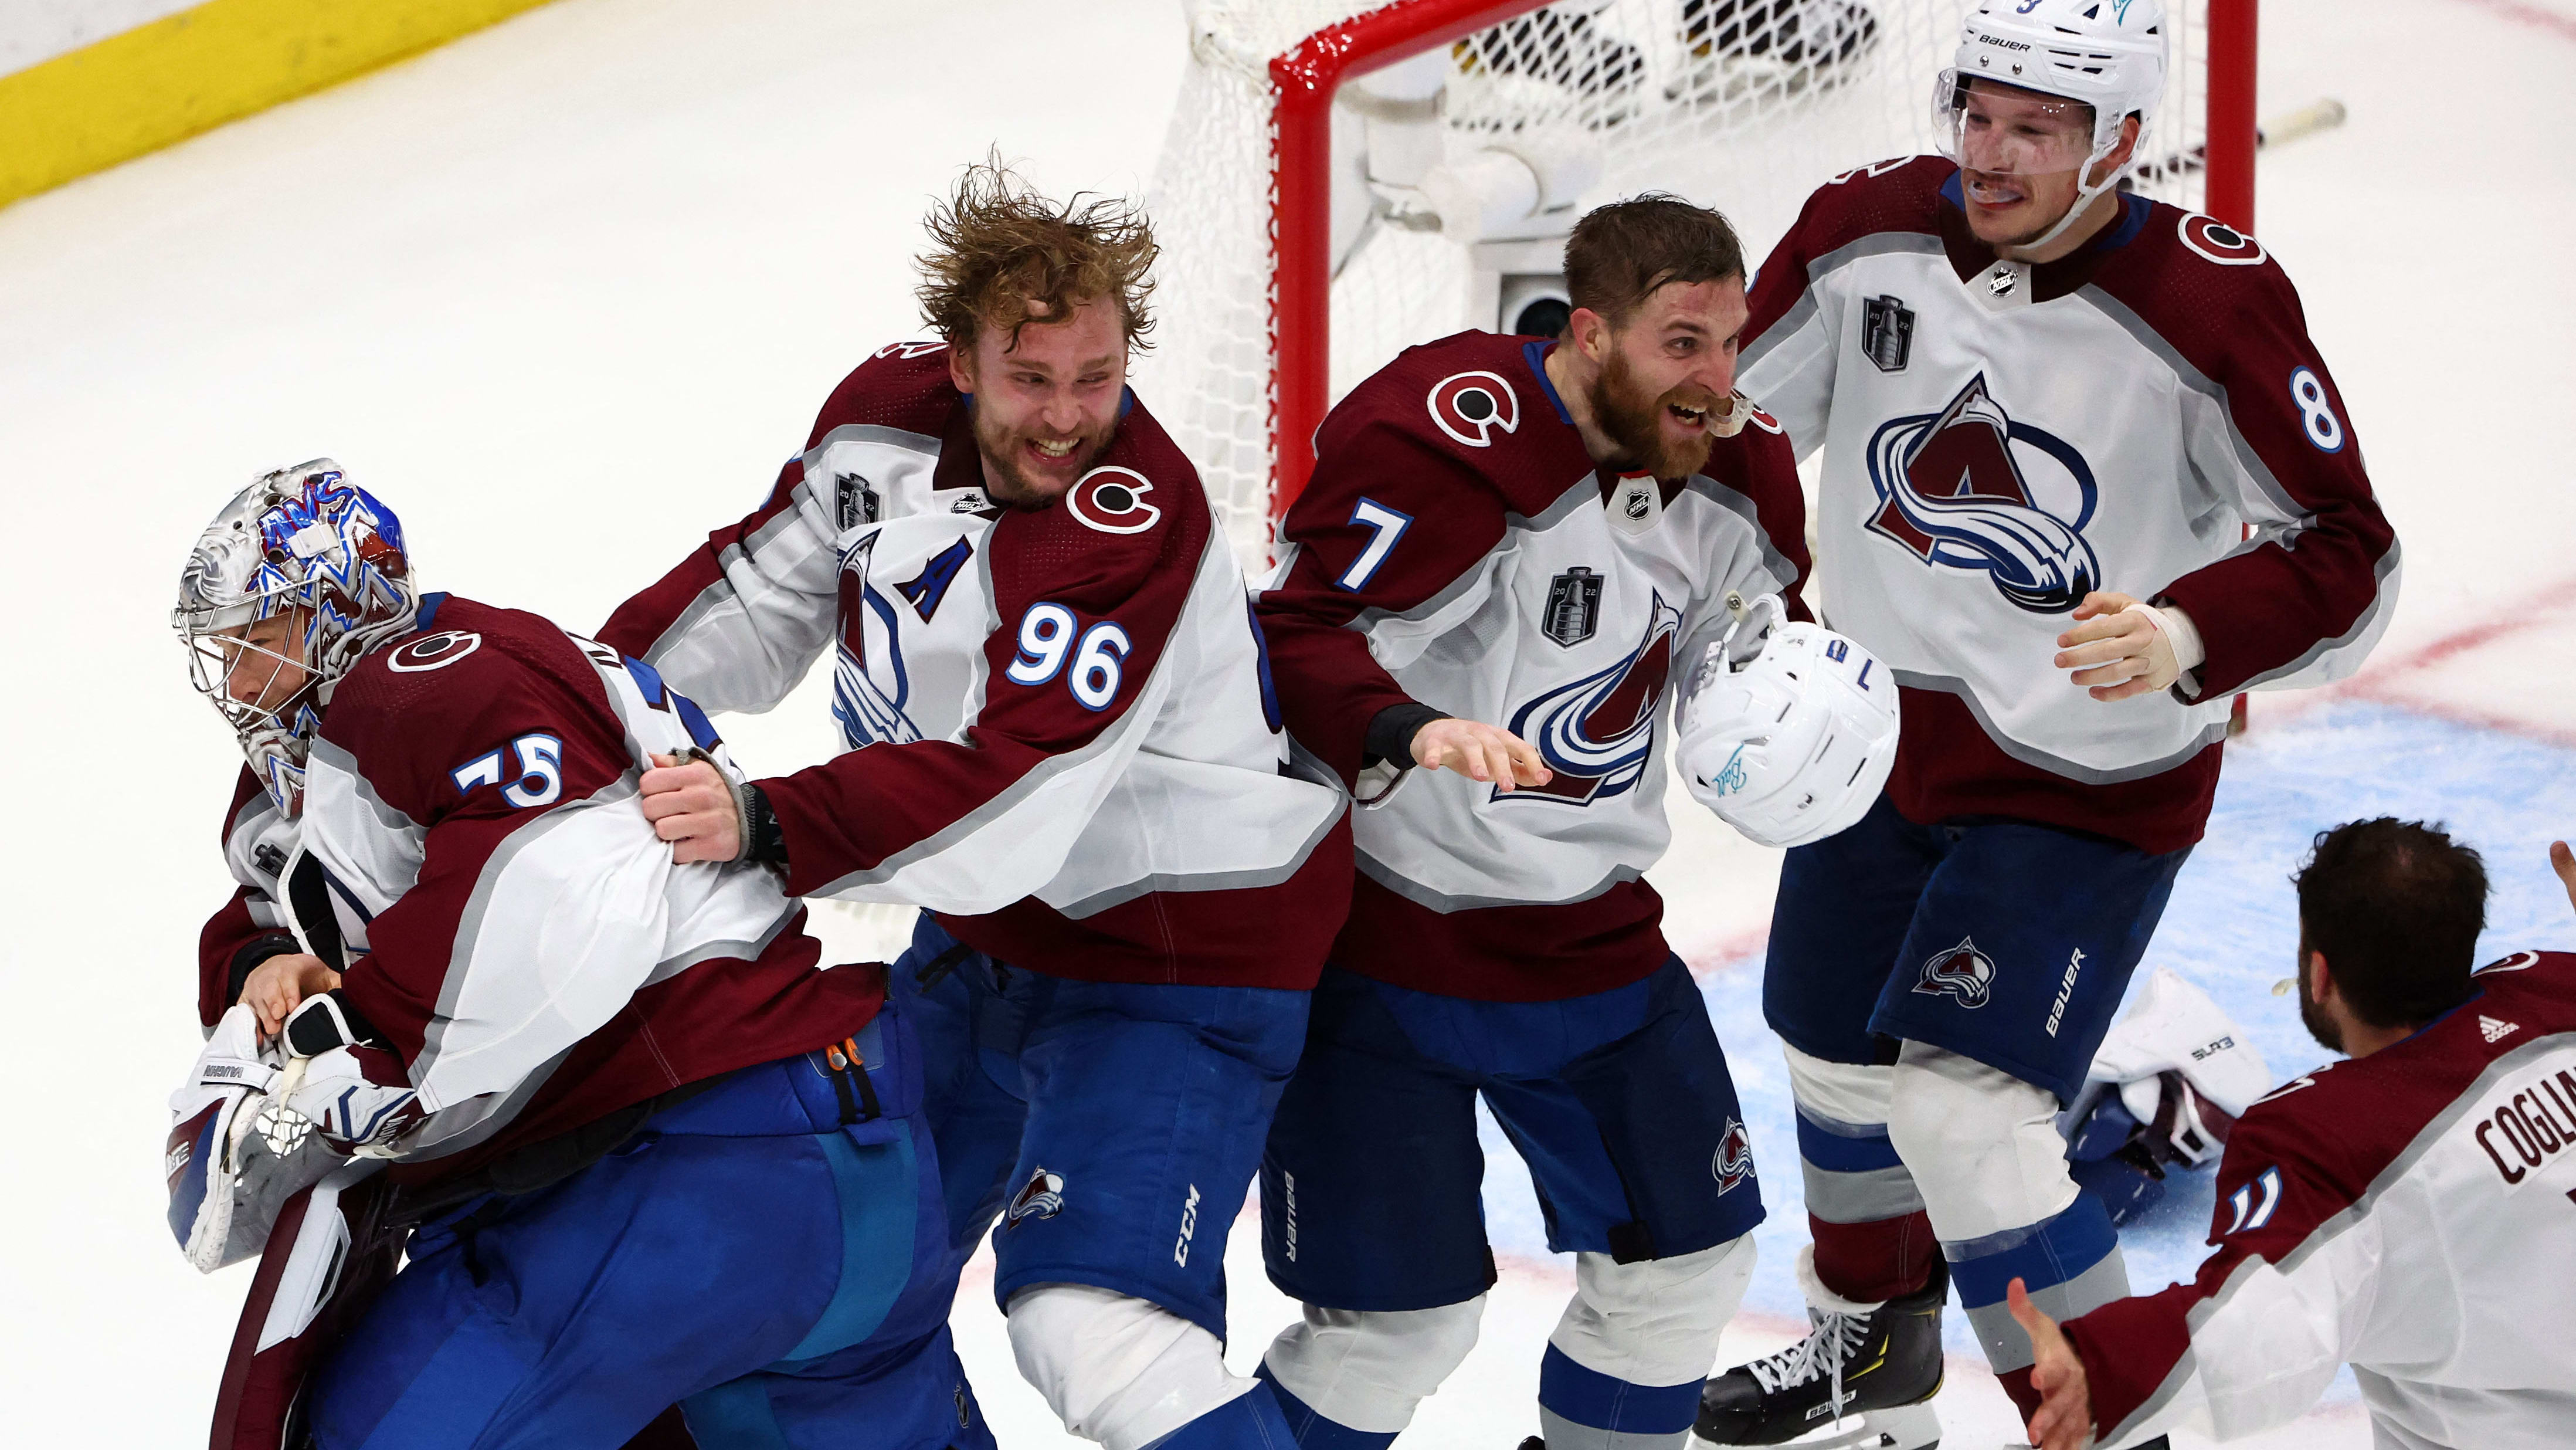 Colorado Avalanche gear flying off shelves after Stanley Cup win